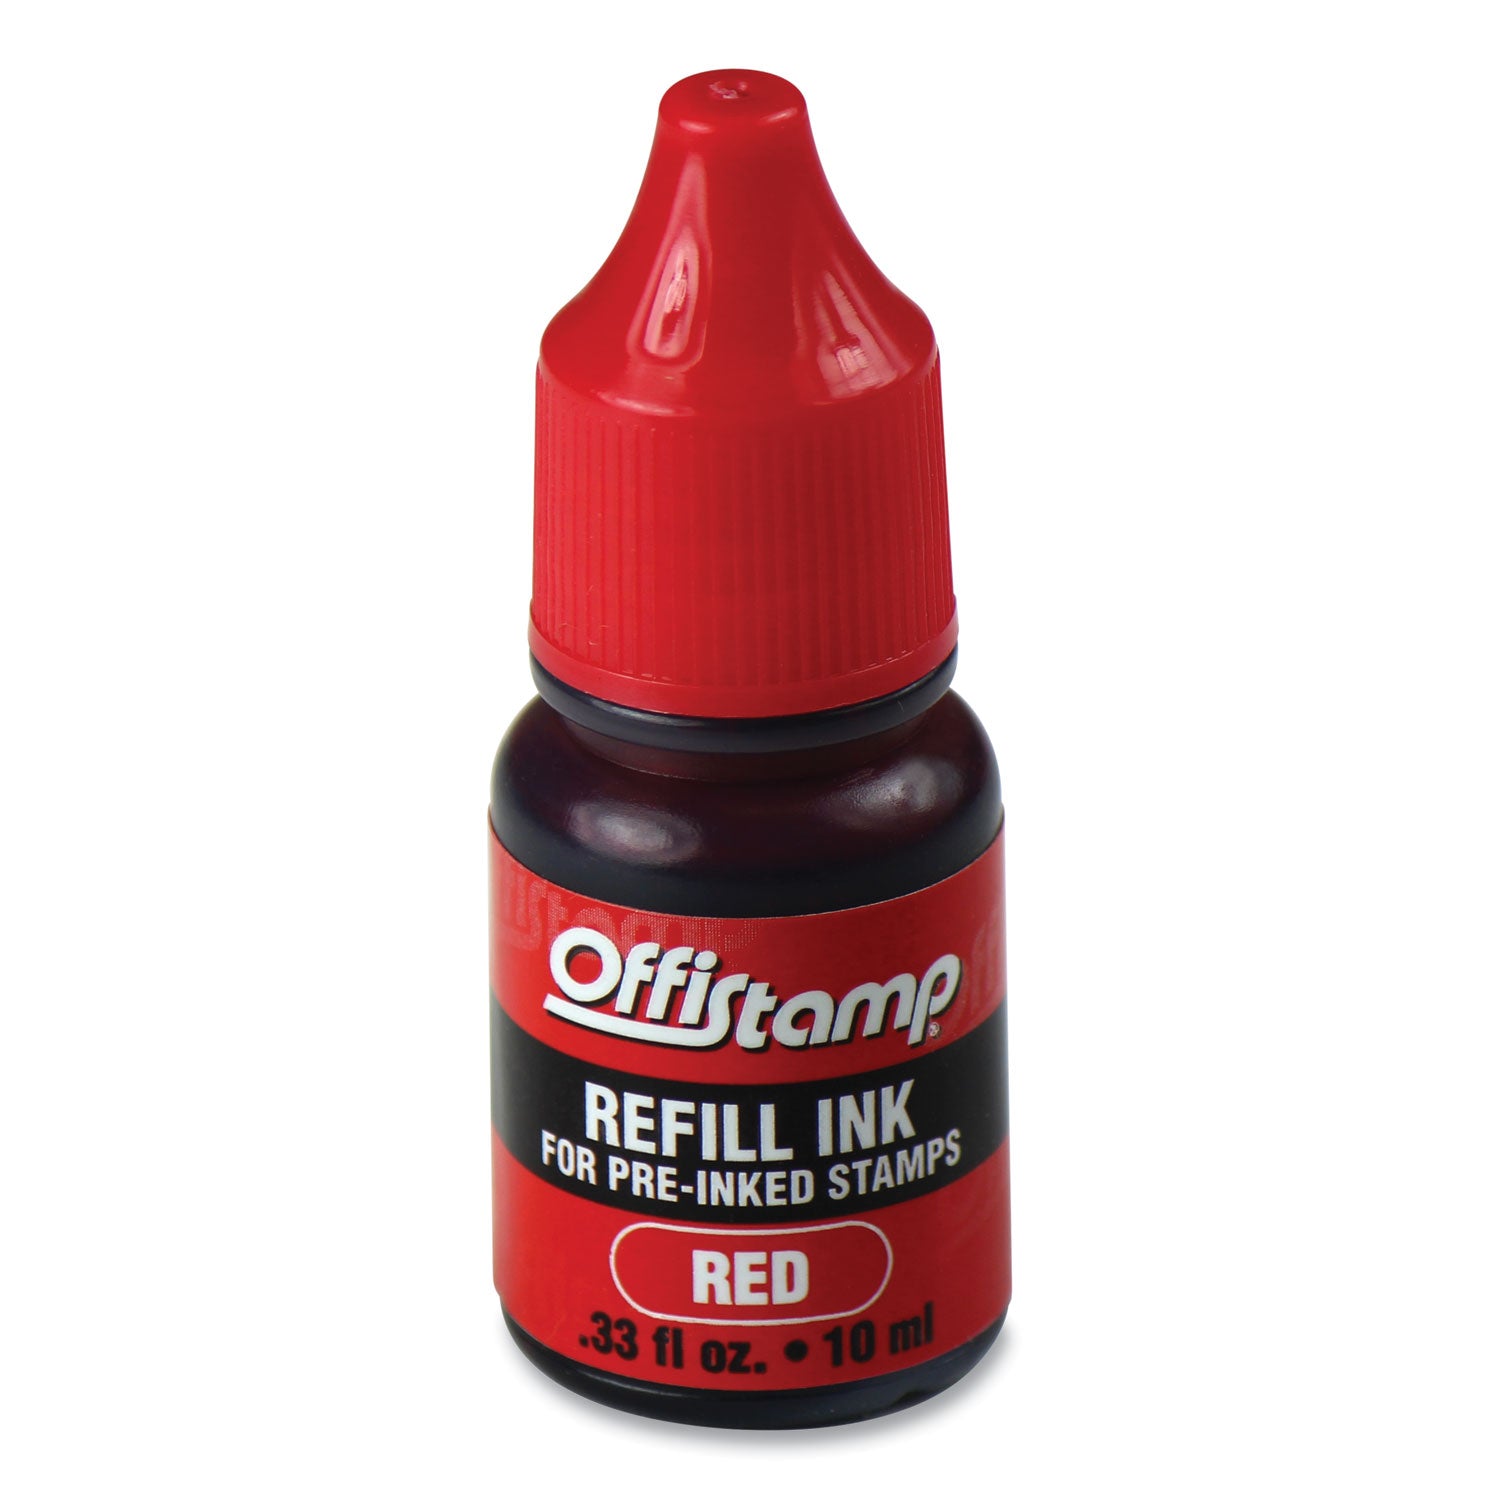 refill-ink-for-pre-inked-stamps-033-oz-red_mkg034517 - 2